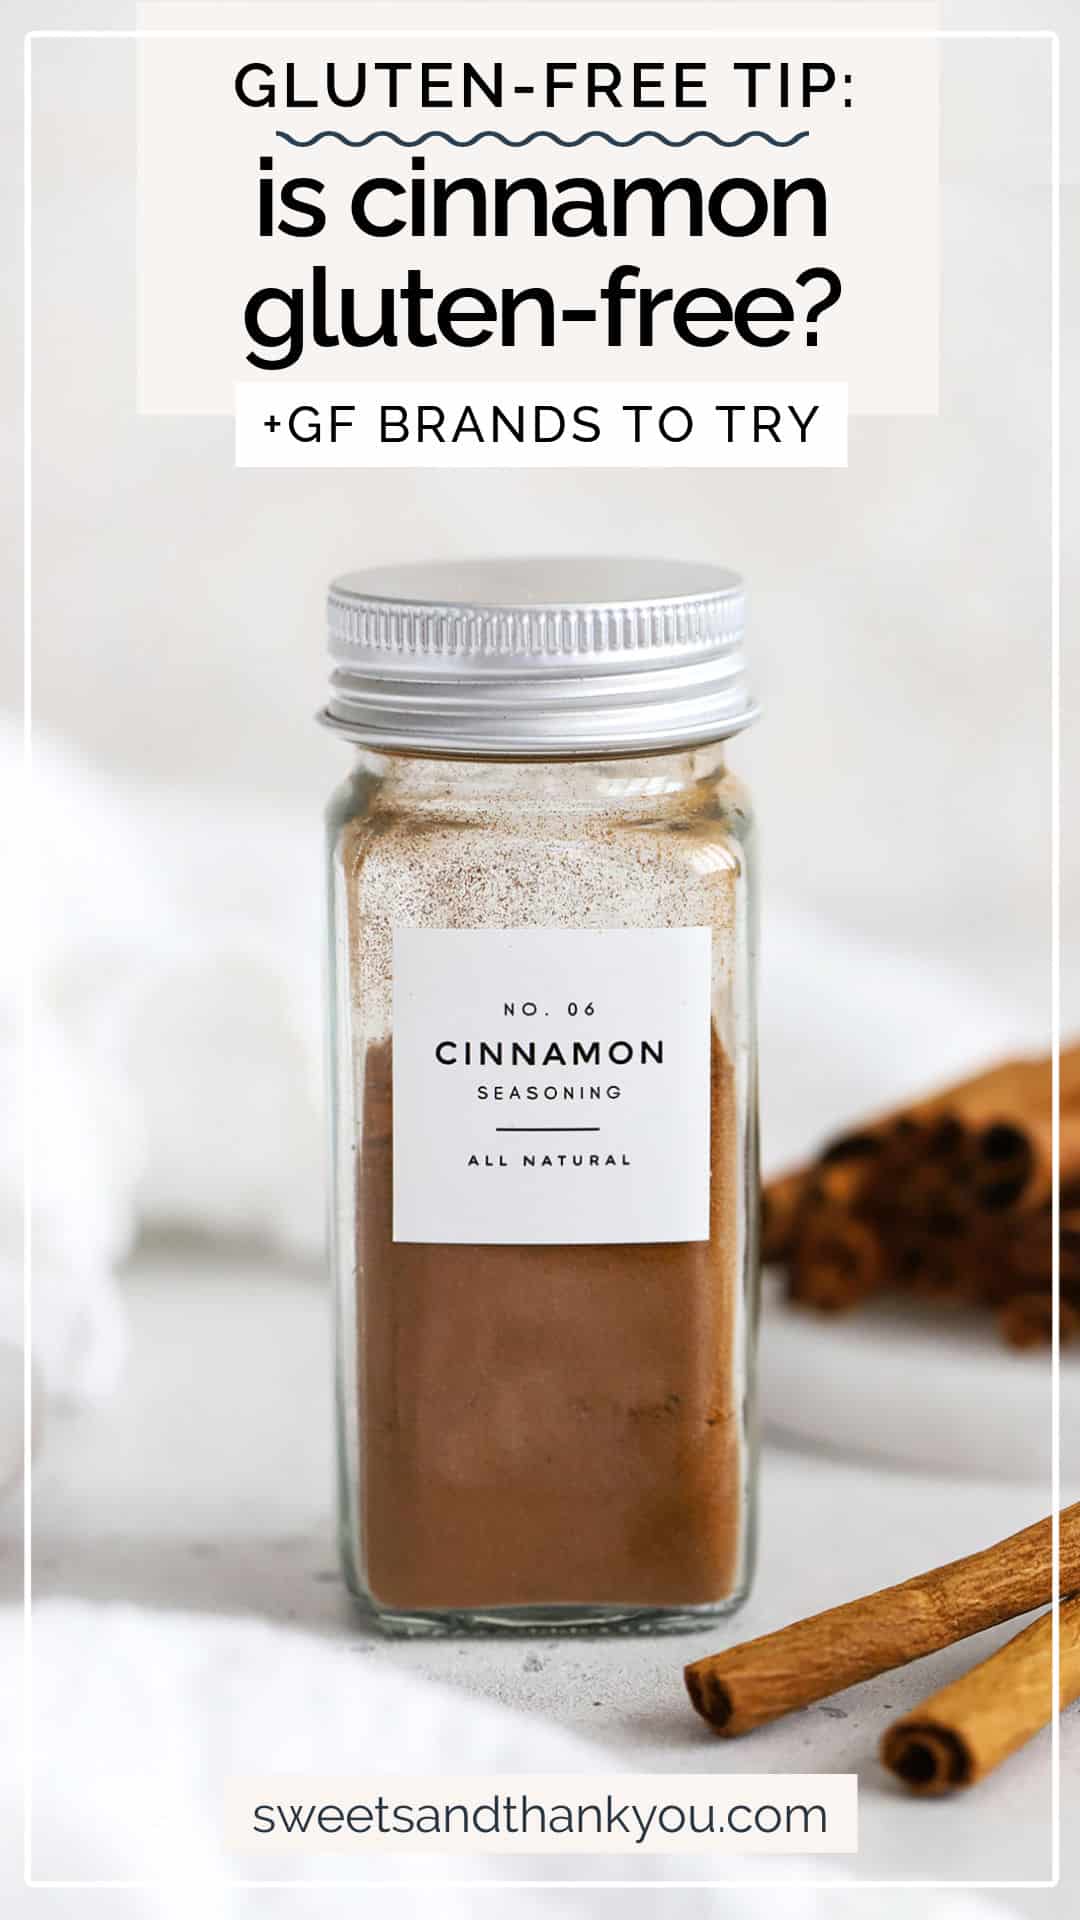 Is Cinnamon Gluten-Free? - We'll take the guesswork out of finding gluten-free cinnamon and cinnamon sticks at the grocery store! // is ground cinnamon gluten-free / are cinnamon sticks gluten-free / brands of gluten-free cinnamon / gluten free cinnamon brands / gluten free spices / gluten free baking tip